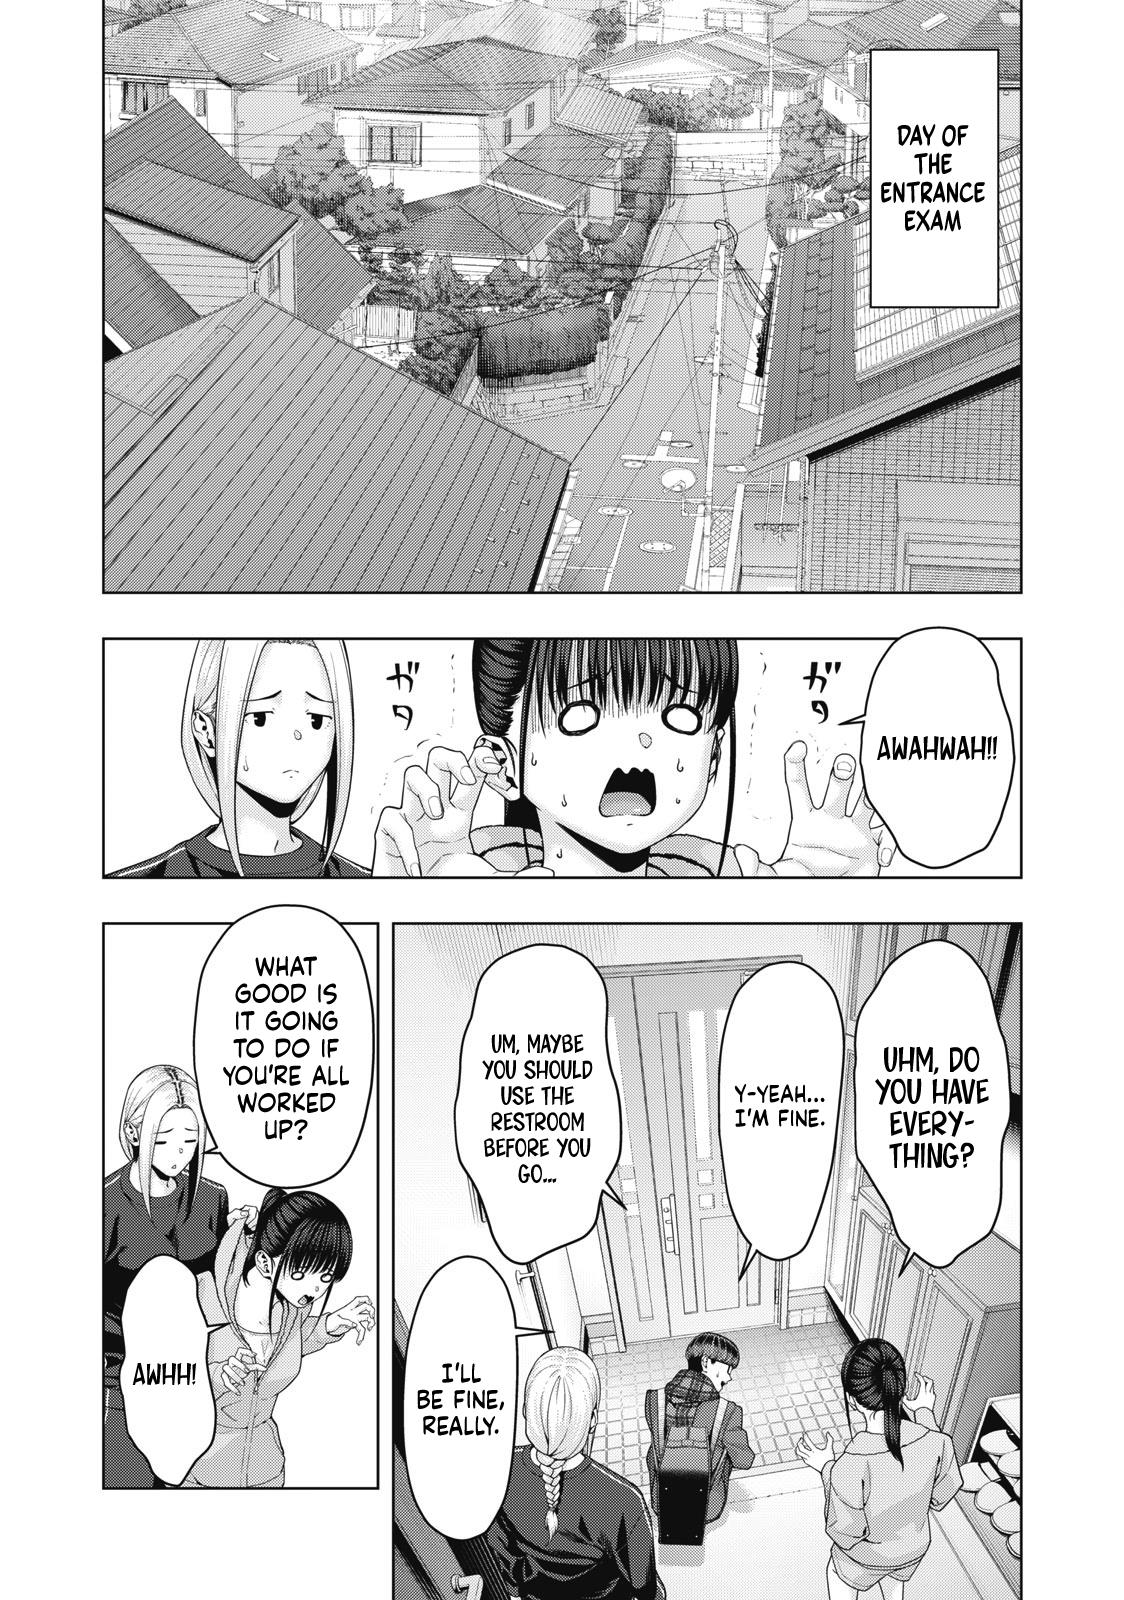 My Girlfriend's Friend Vol.4 Chapter 68 - Picture 3